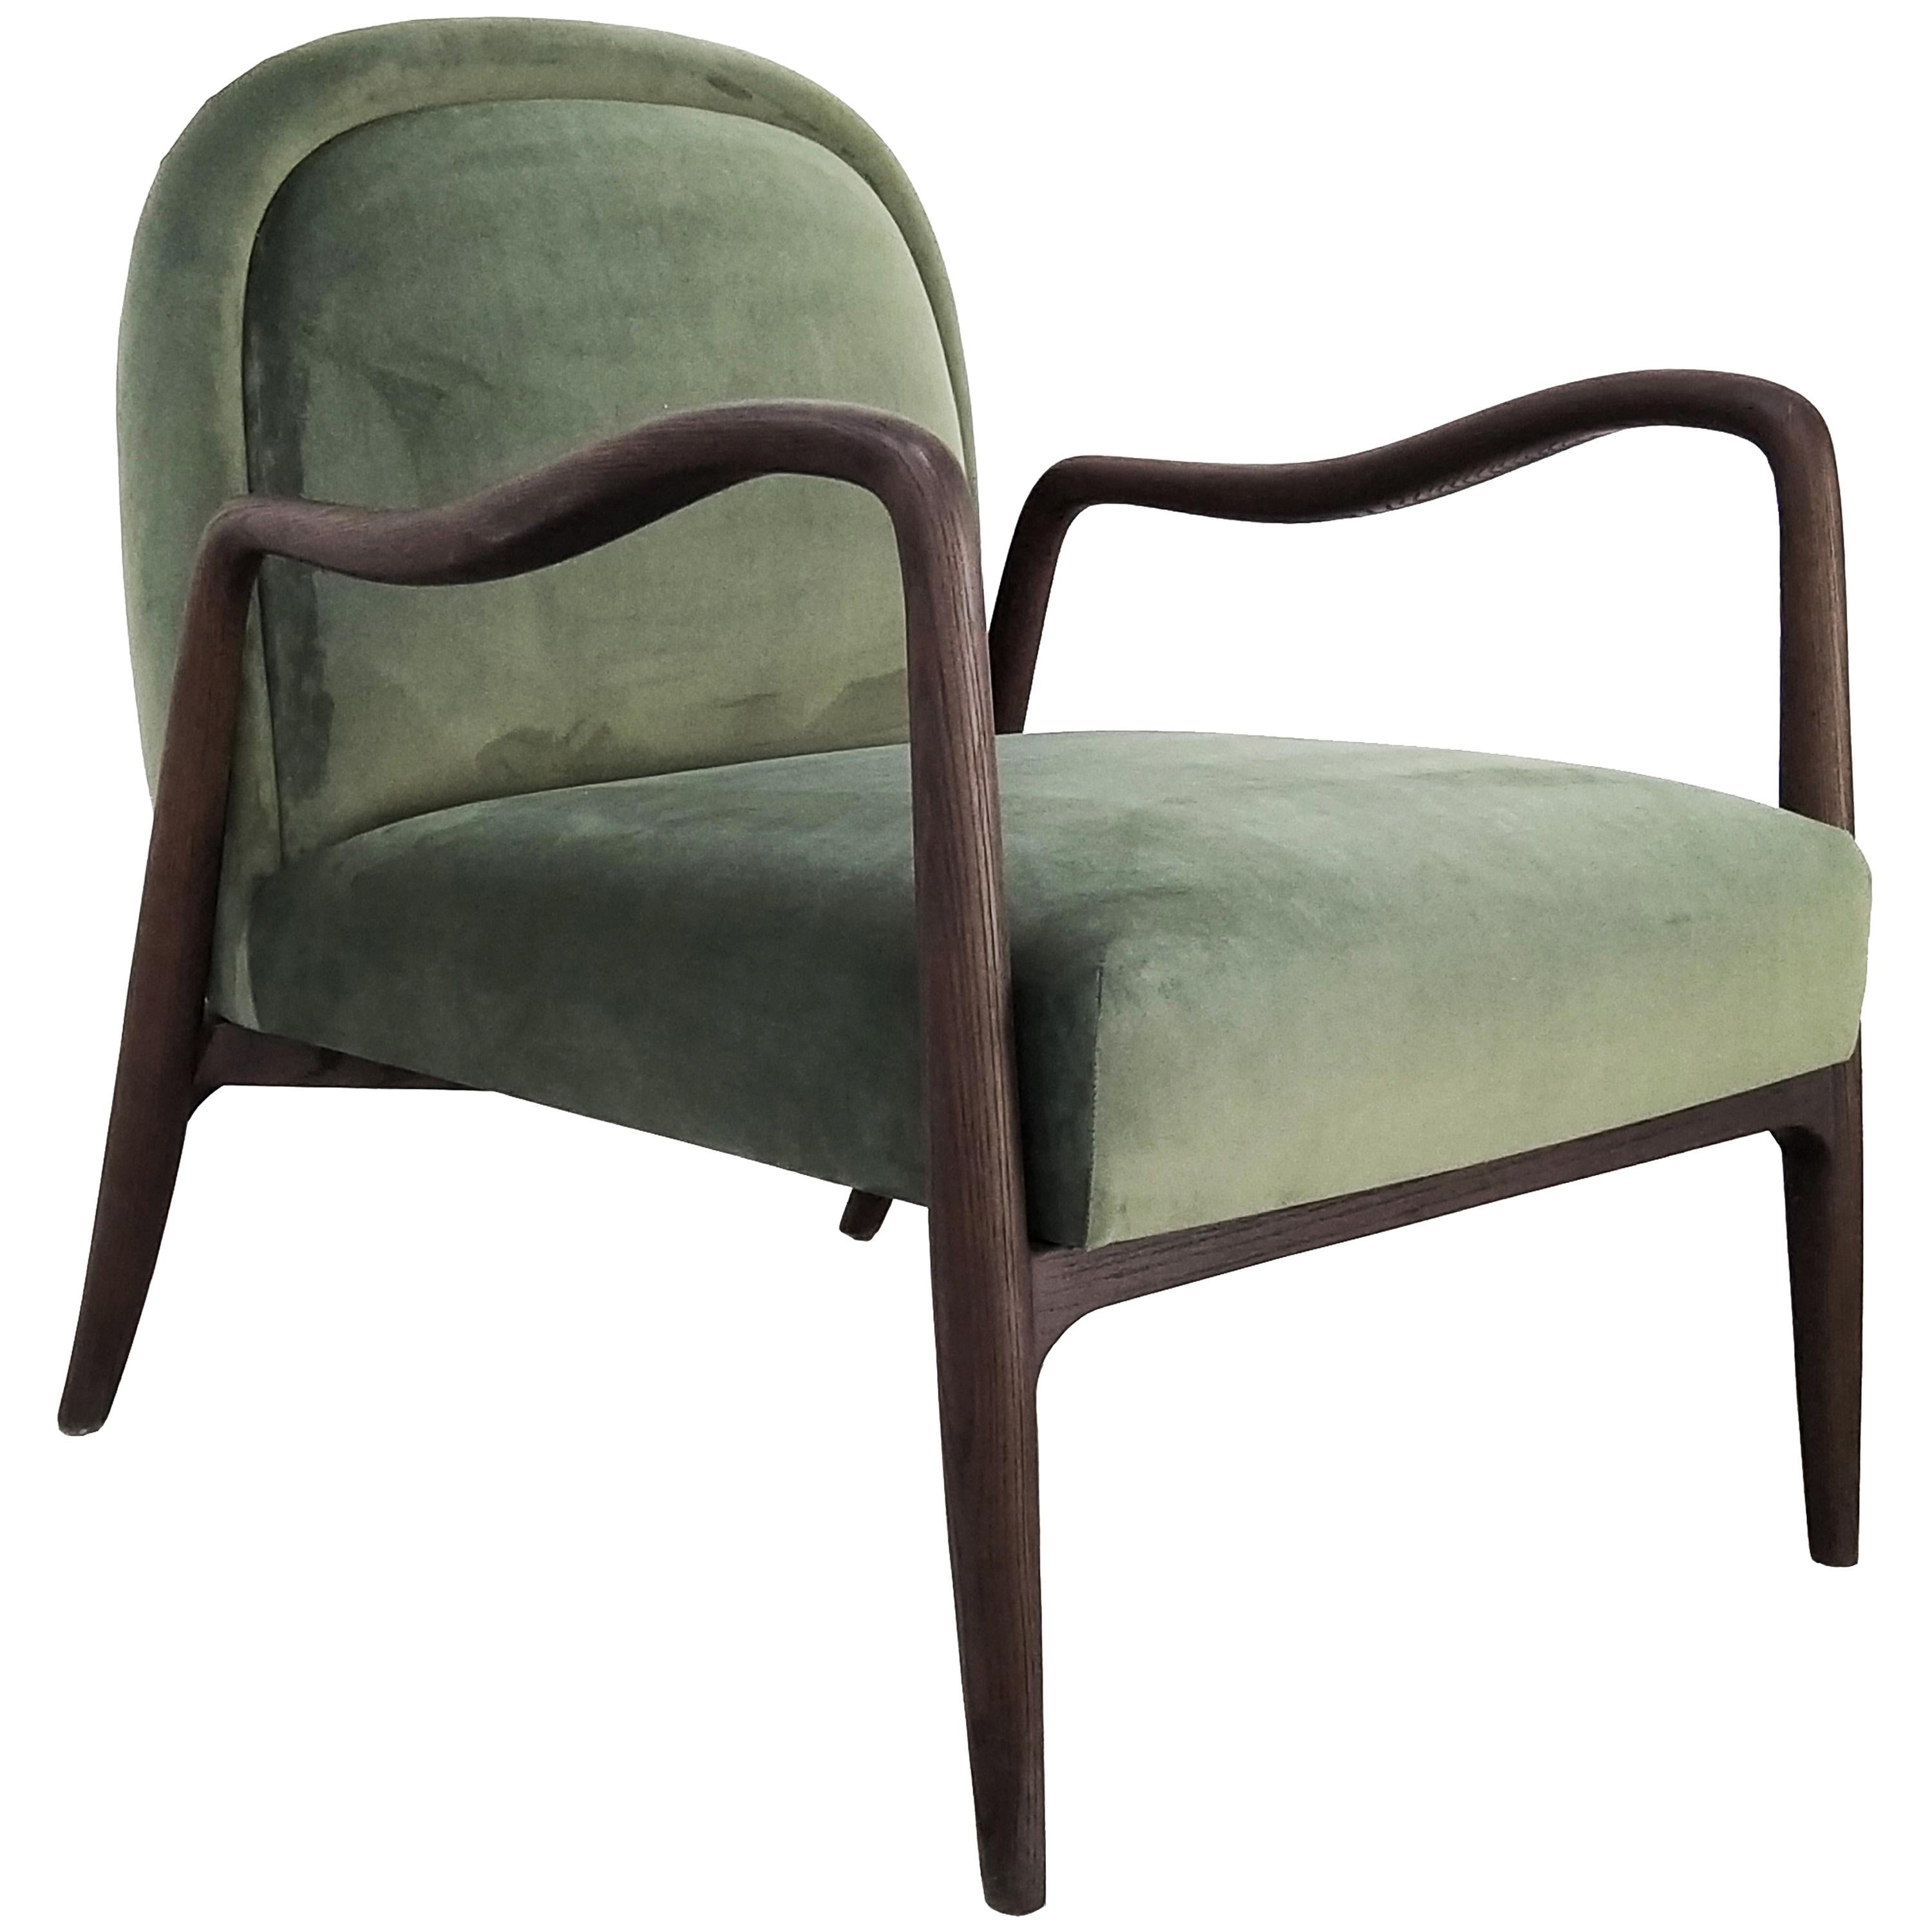 Armchair Mid Century Rhythm André Fu Living Oak Olive Green Upholstered New For Sale